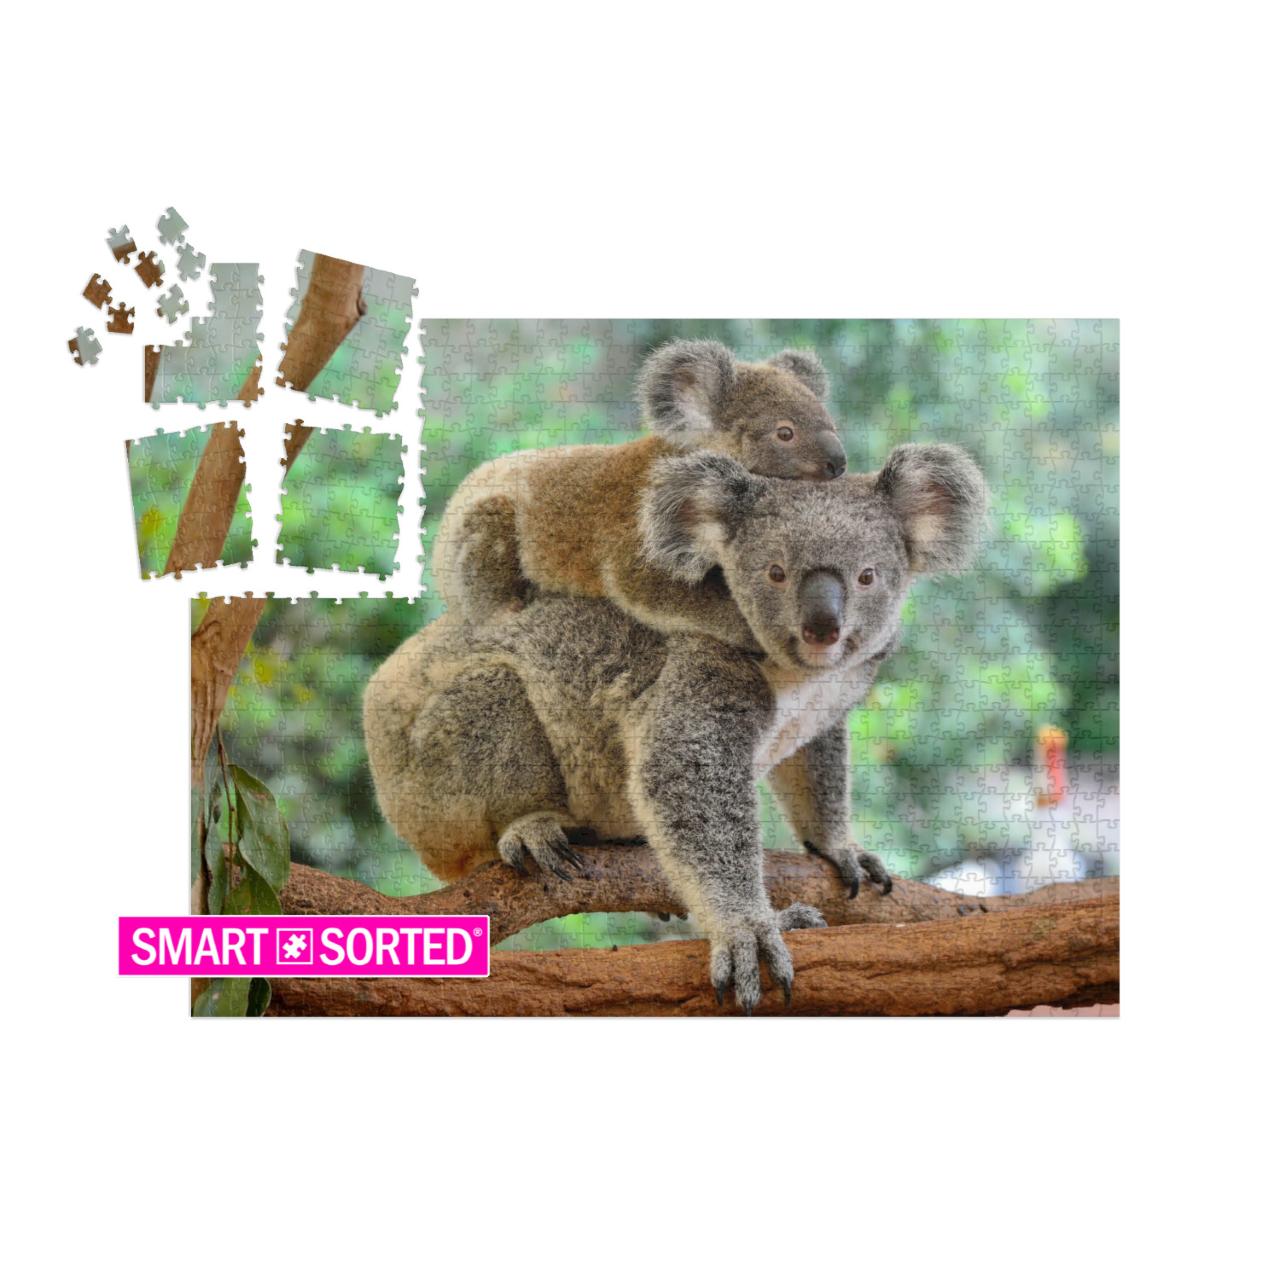 Mother Koala with Baby on Her Back, on Eucalyptus Tree... | SMART SORTED® | Jigsaw Puzzle with 1000 pieces